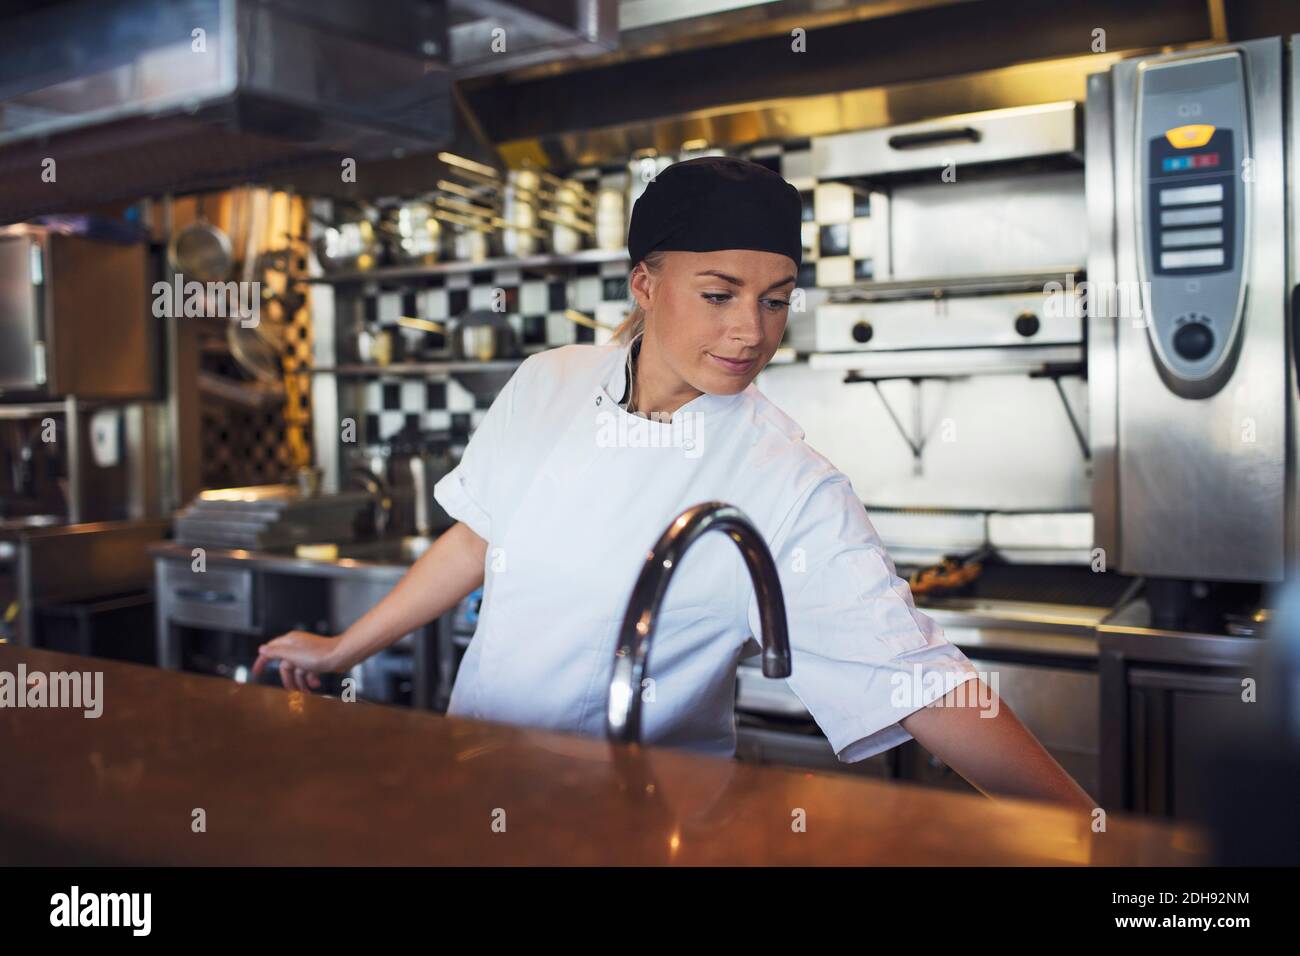 Young female chef working in kitchen at restaurant Stock Photo